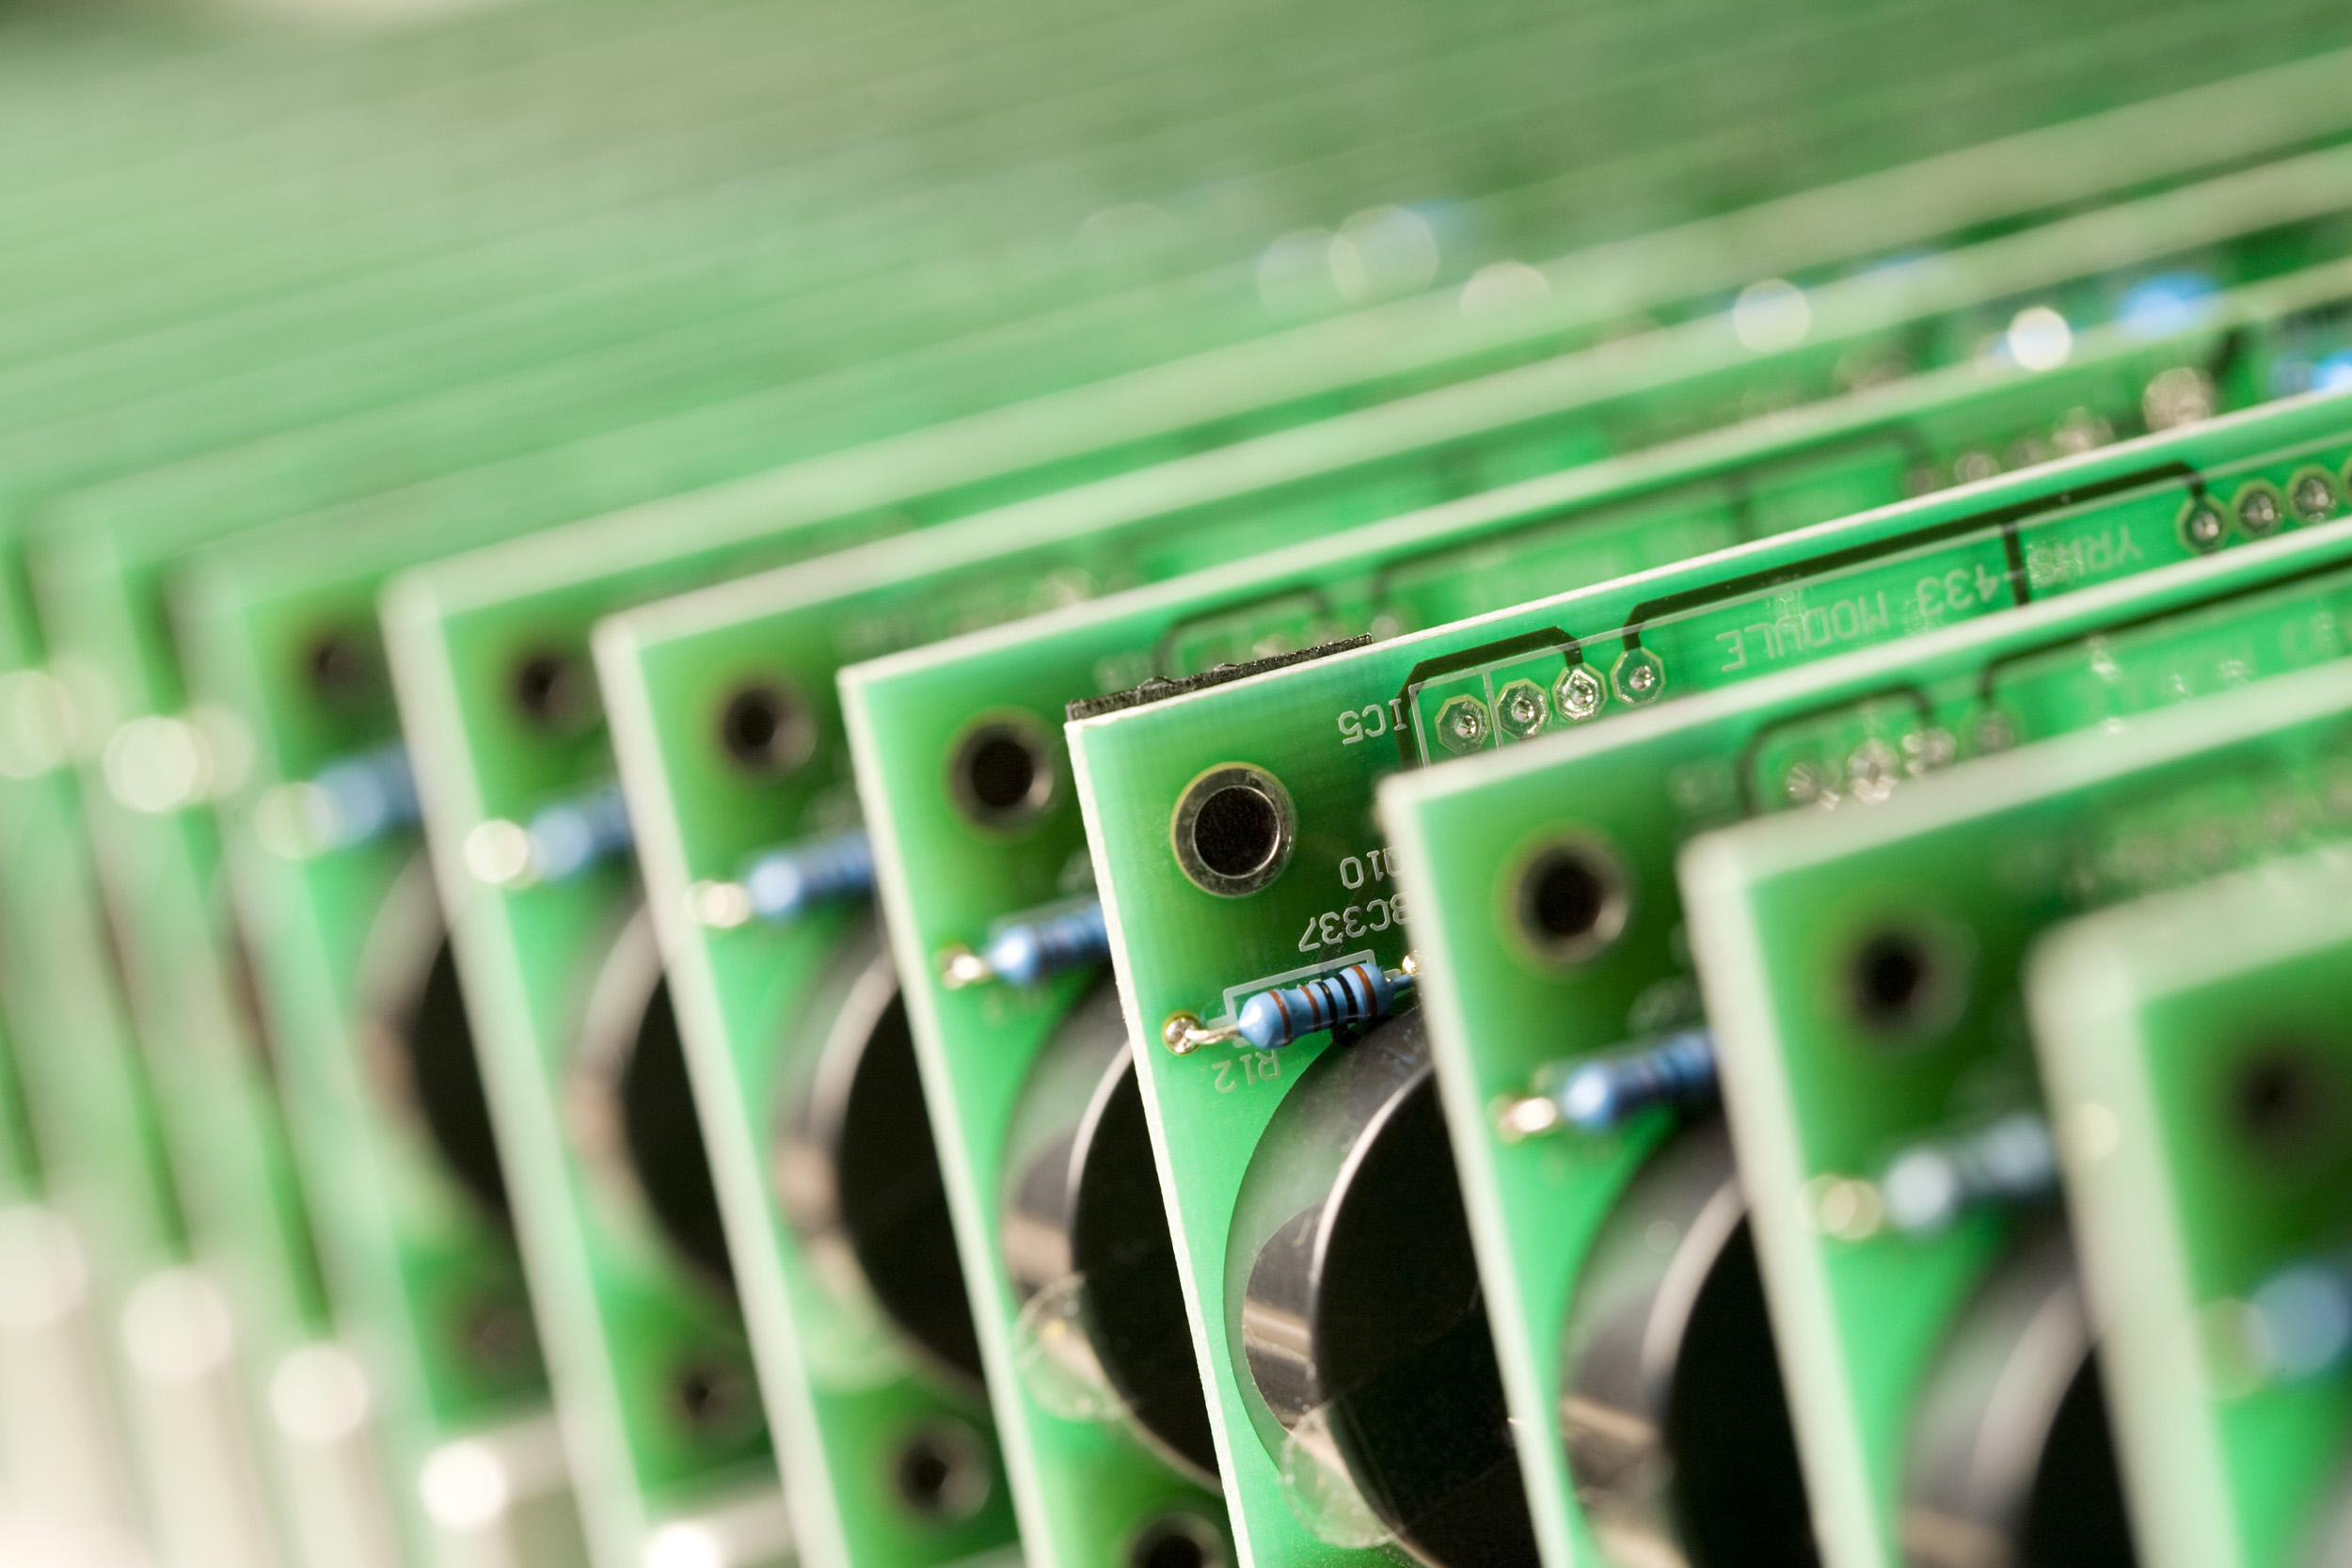 Electronic circuit boards lined up. Paul Scott, industry.